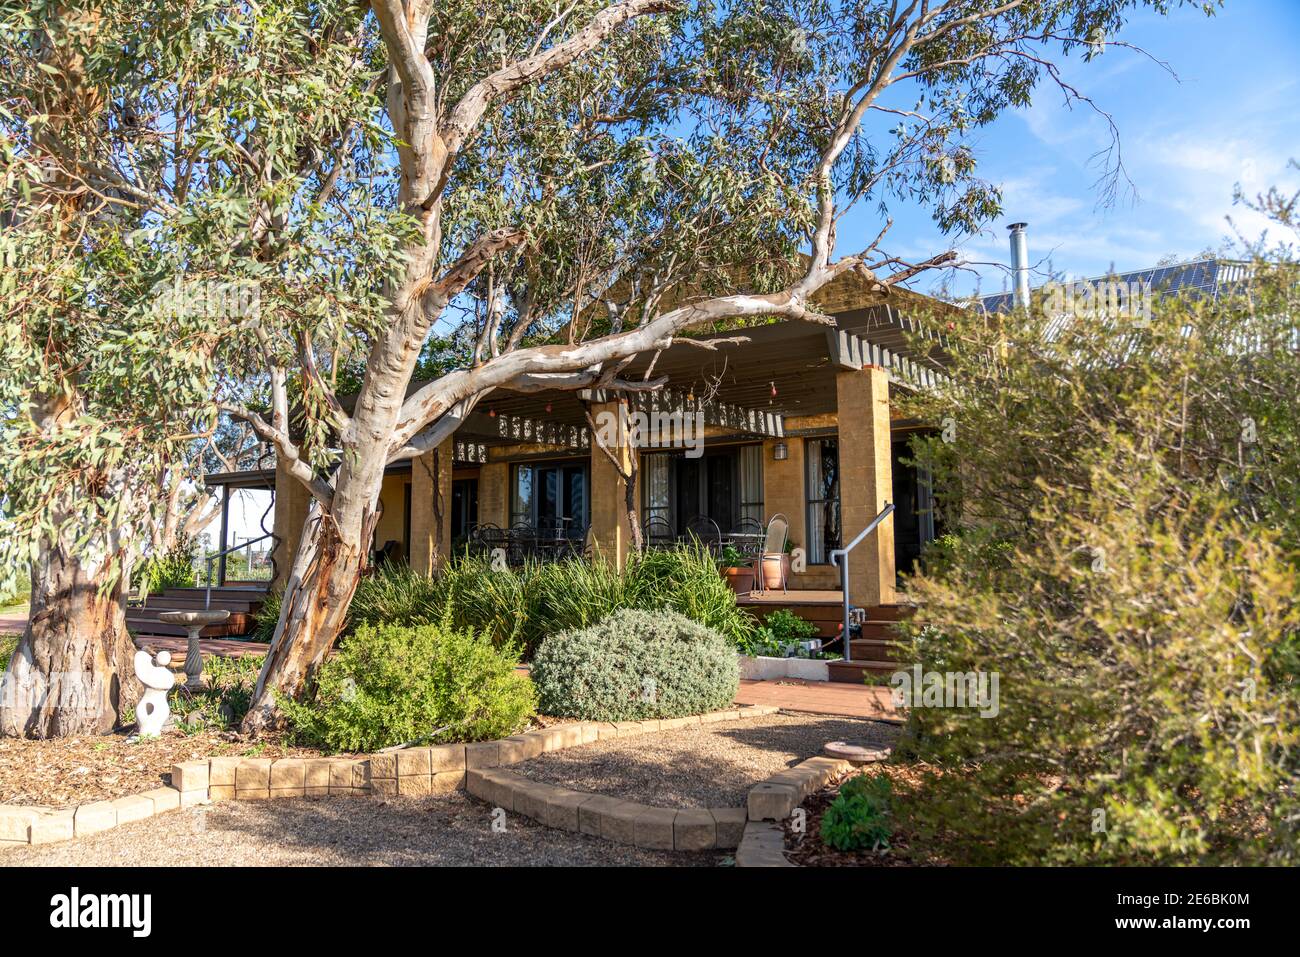 Landscaped Australian Native Plant Garden surrounds a modern country style home. Stock Photo